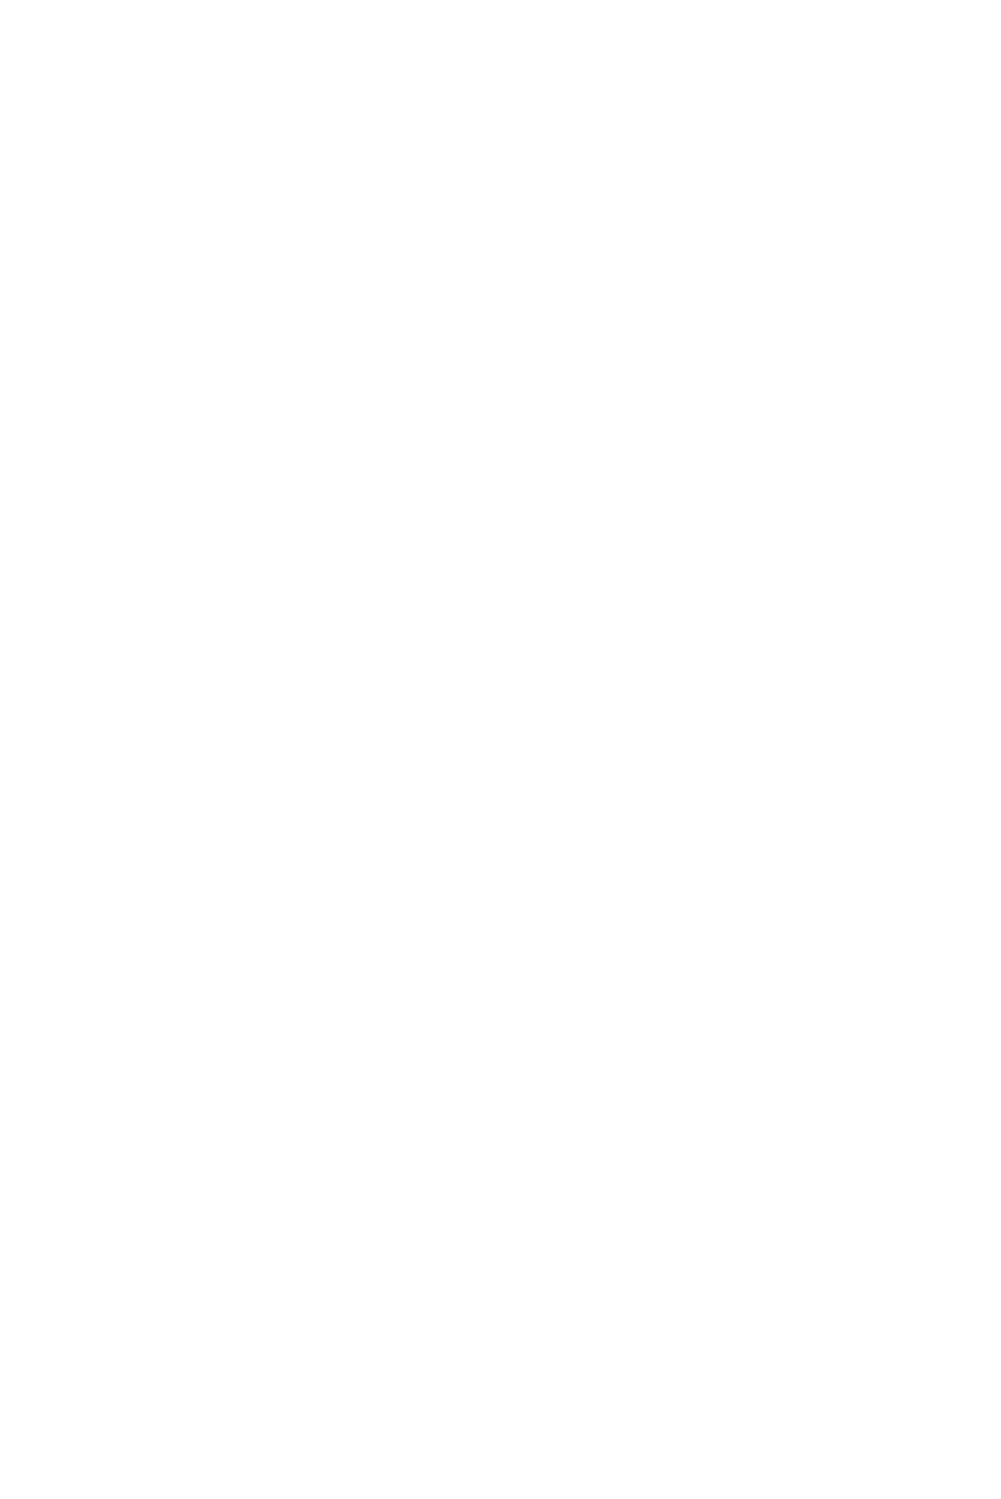 Death Note (00800265)